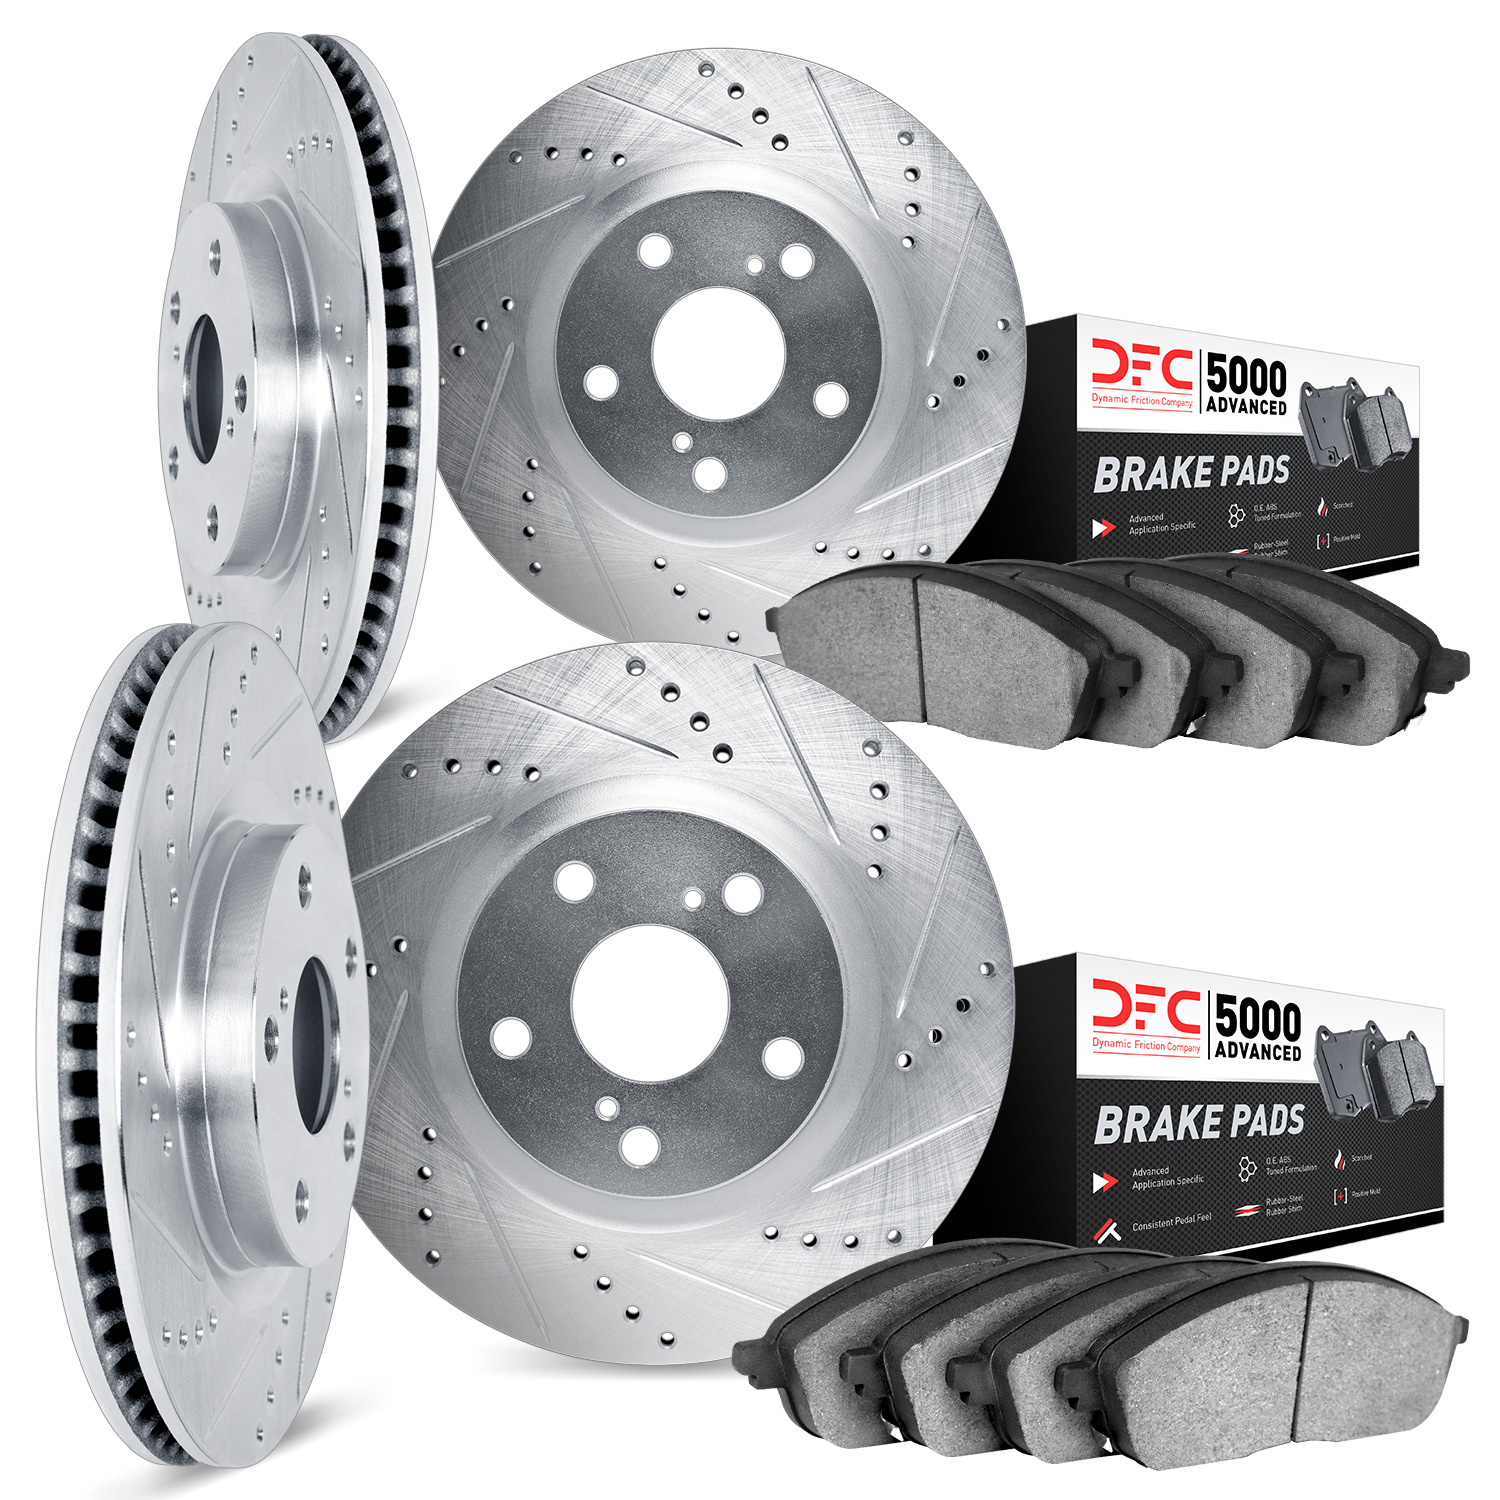 7504-31015 Drilled/Slotted Brake Rotors w/5000 Advanced Brake Pads Kit [Silver], 2008-2010 BMW, Position: Front and Rear